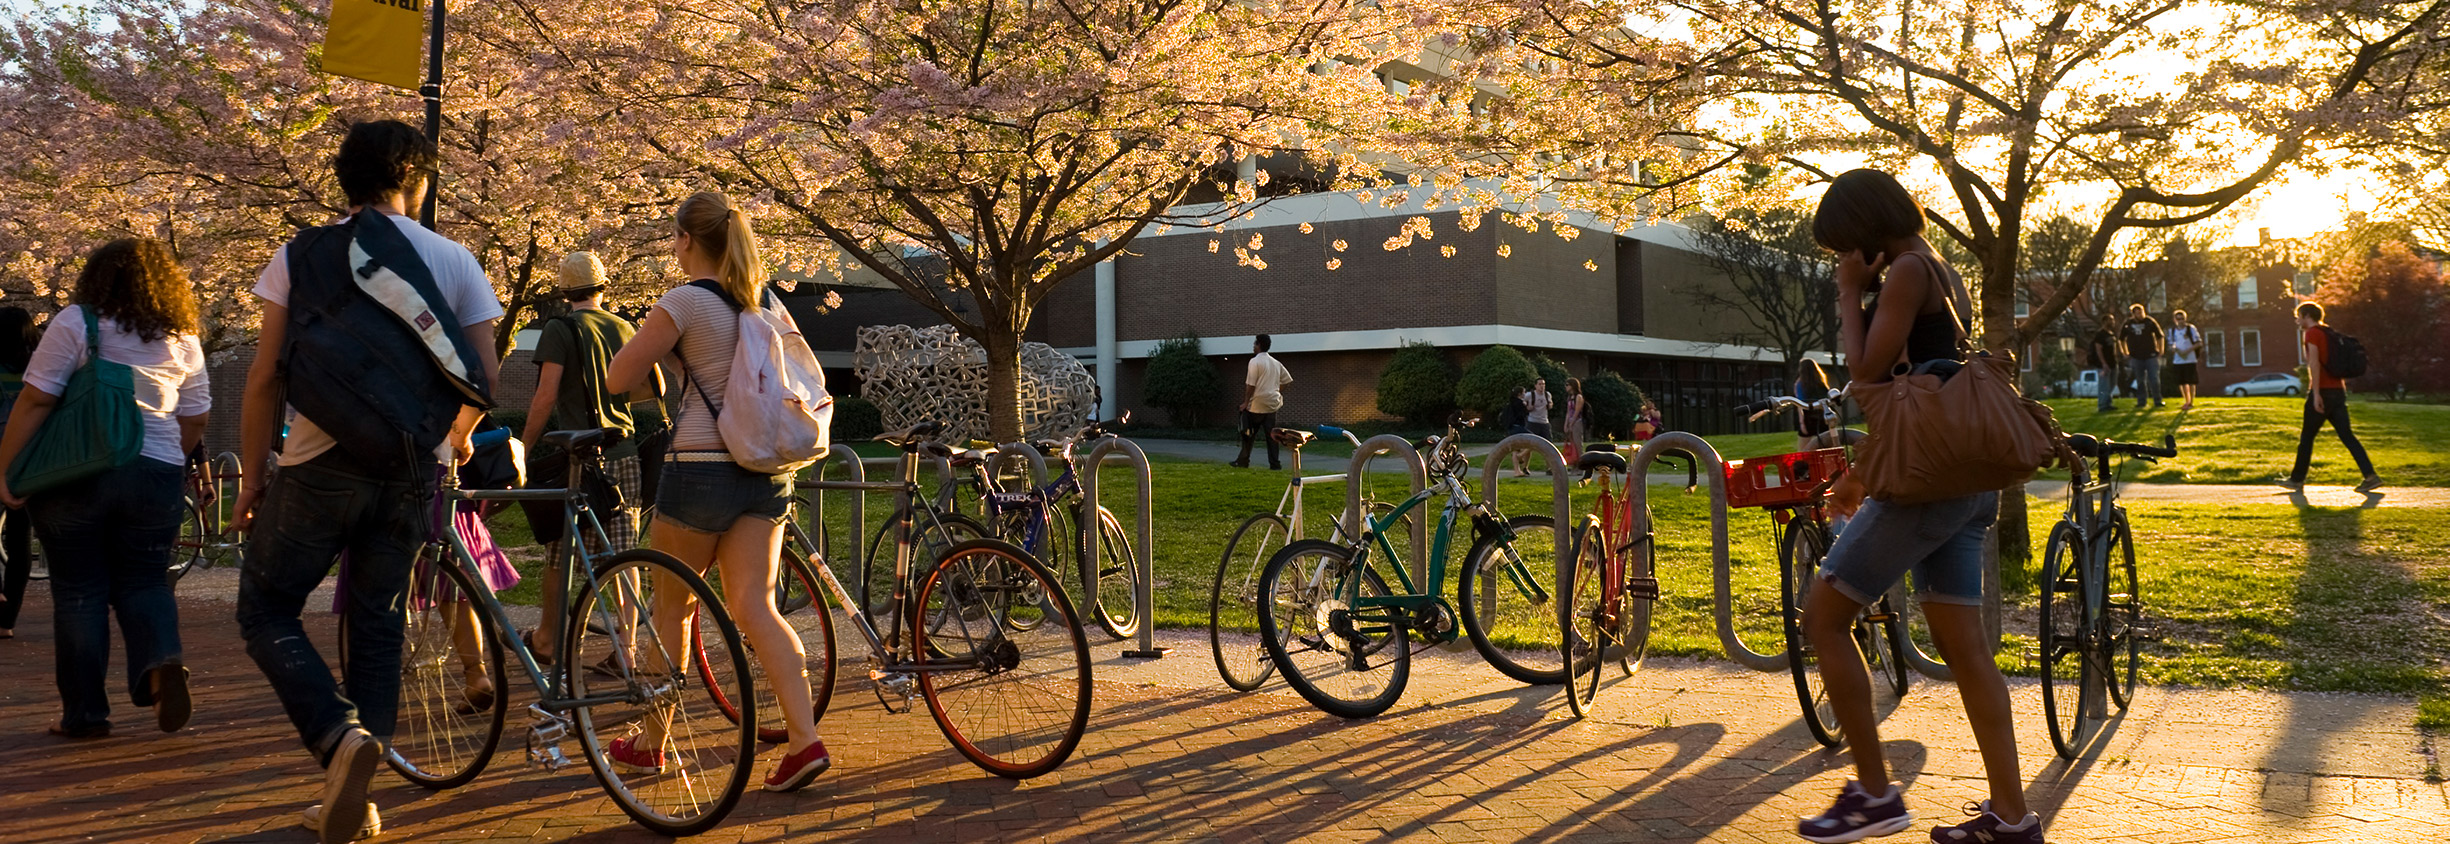 Image of students walking on a sunny day on campus